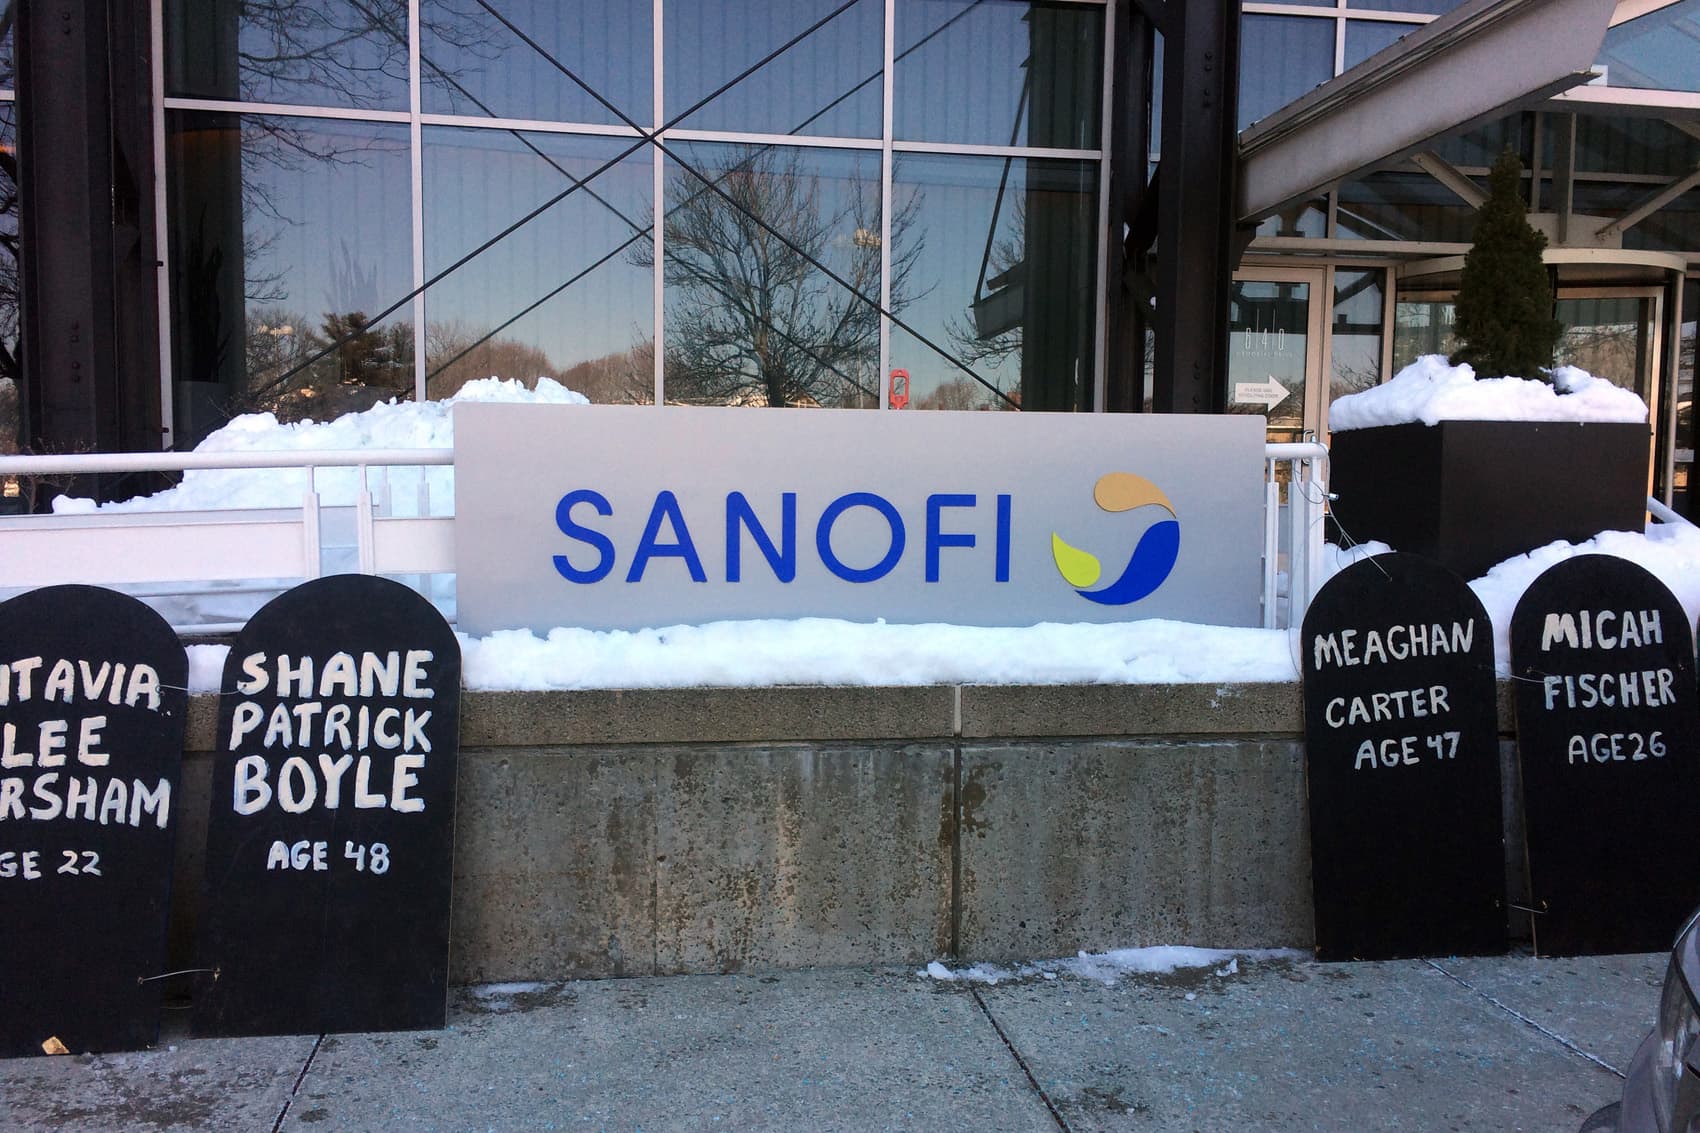 Cardboard headstones line the sidewalk outside of pharmaceutical company Sanofi's Cambridge, Mass., offices. The Right Care Alliance held a protest against high insulin prices, which have led some to the dangerous practice of cutting doses to save. (Anna Bauman/On Point)